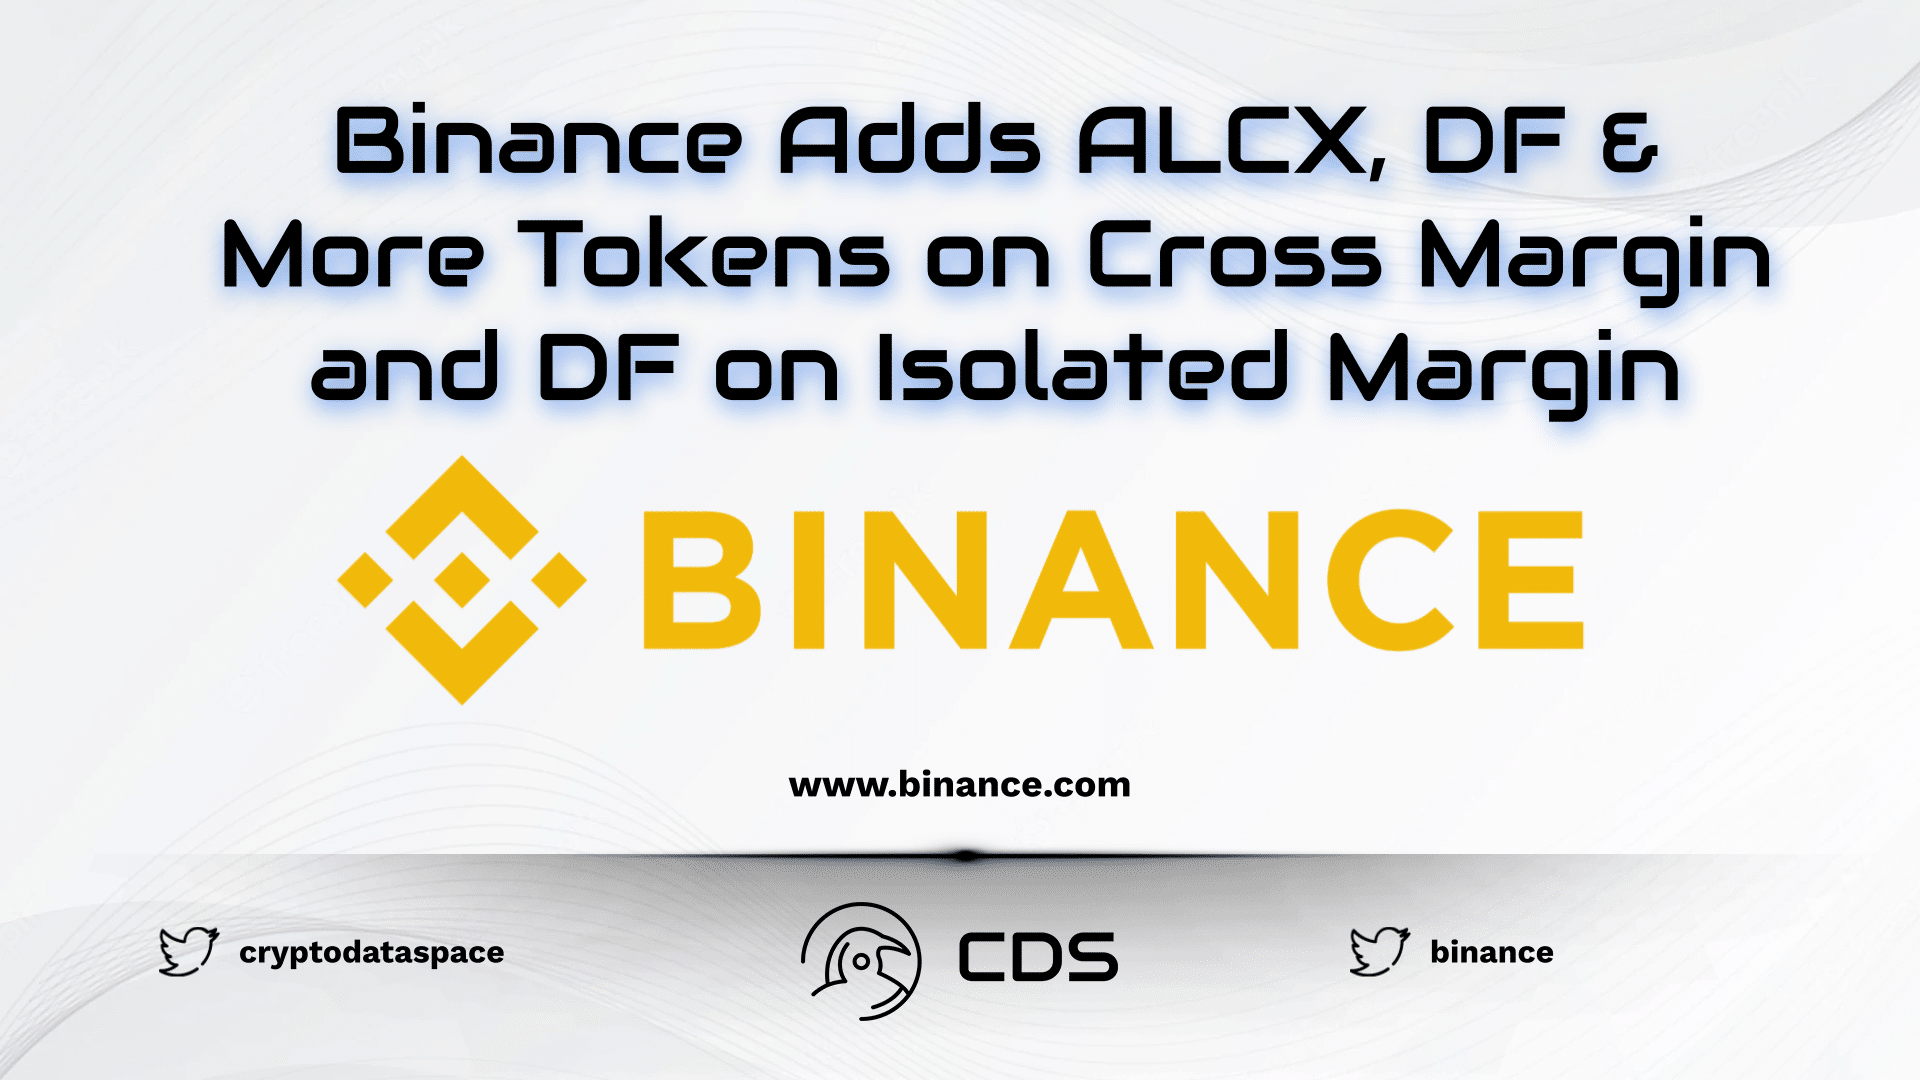 Binance Adds ALCX, DF & More Tokens on Cross Margin and DF on Isolated Margin